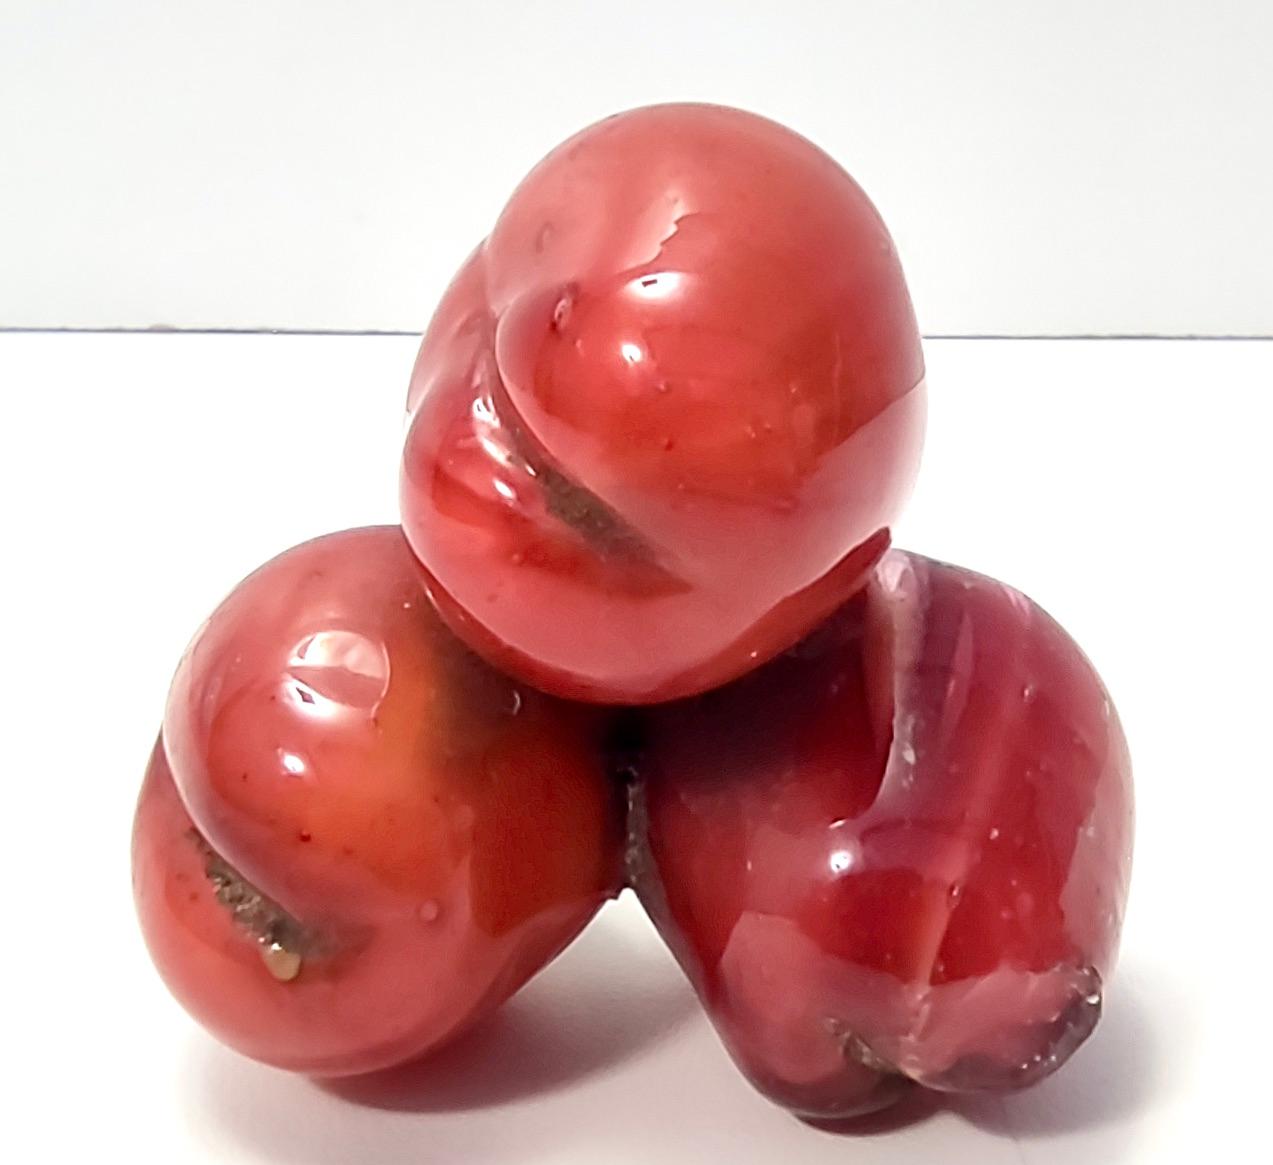 Mid-Century Modern Vintage Murano Glass Decorative Item of Cherries by Martinuzzi for Venini, Italy For Sale